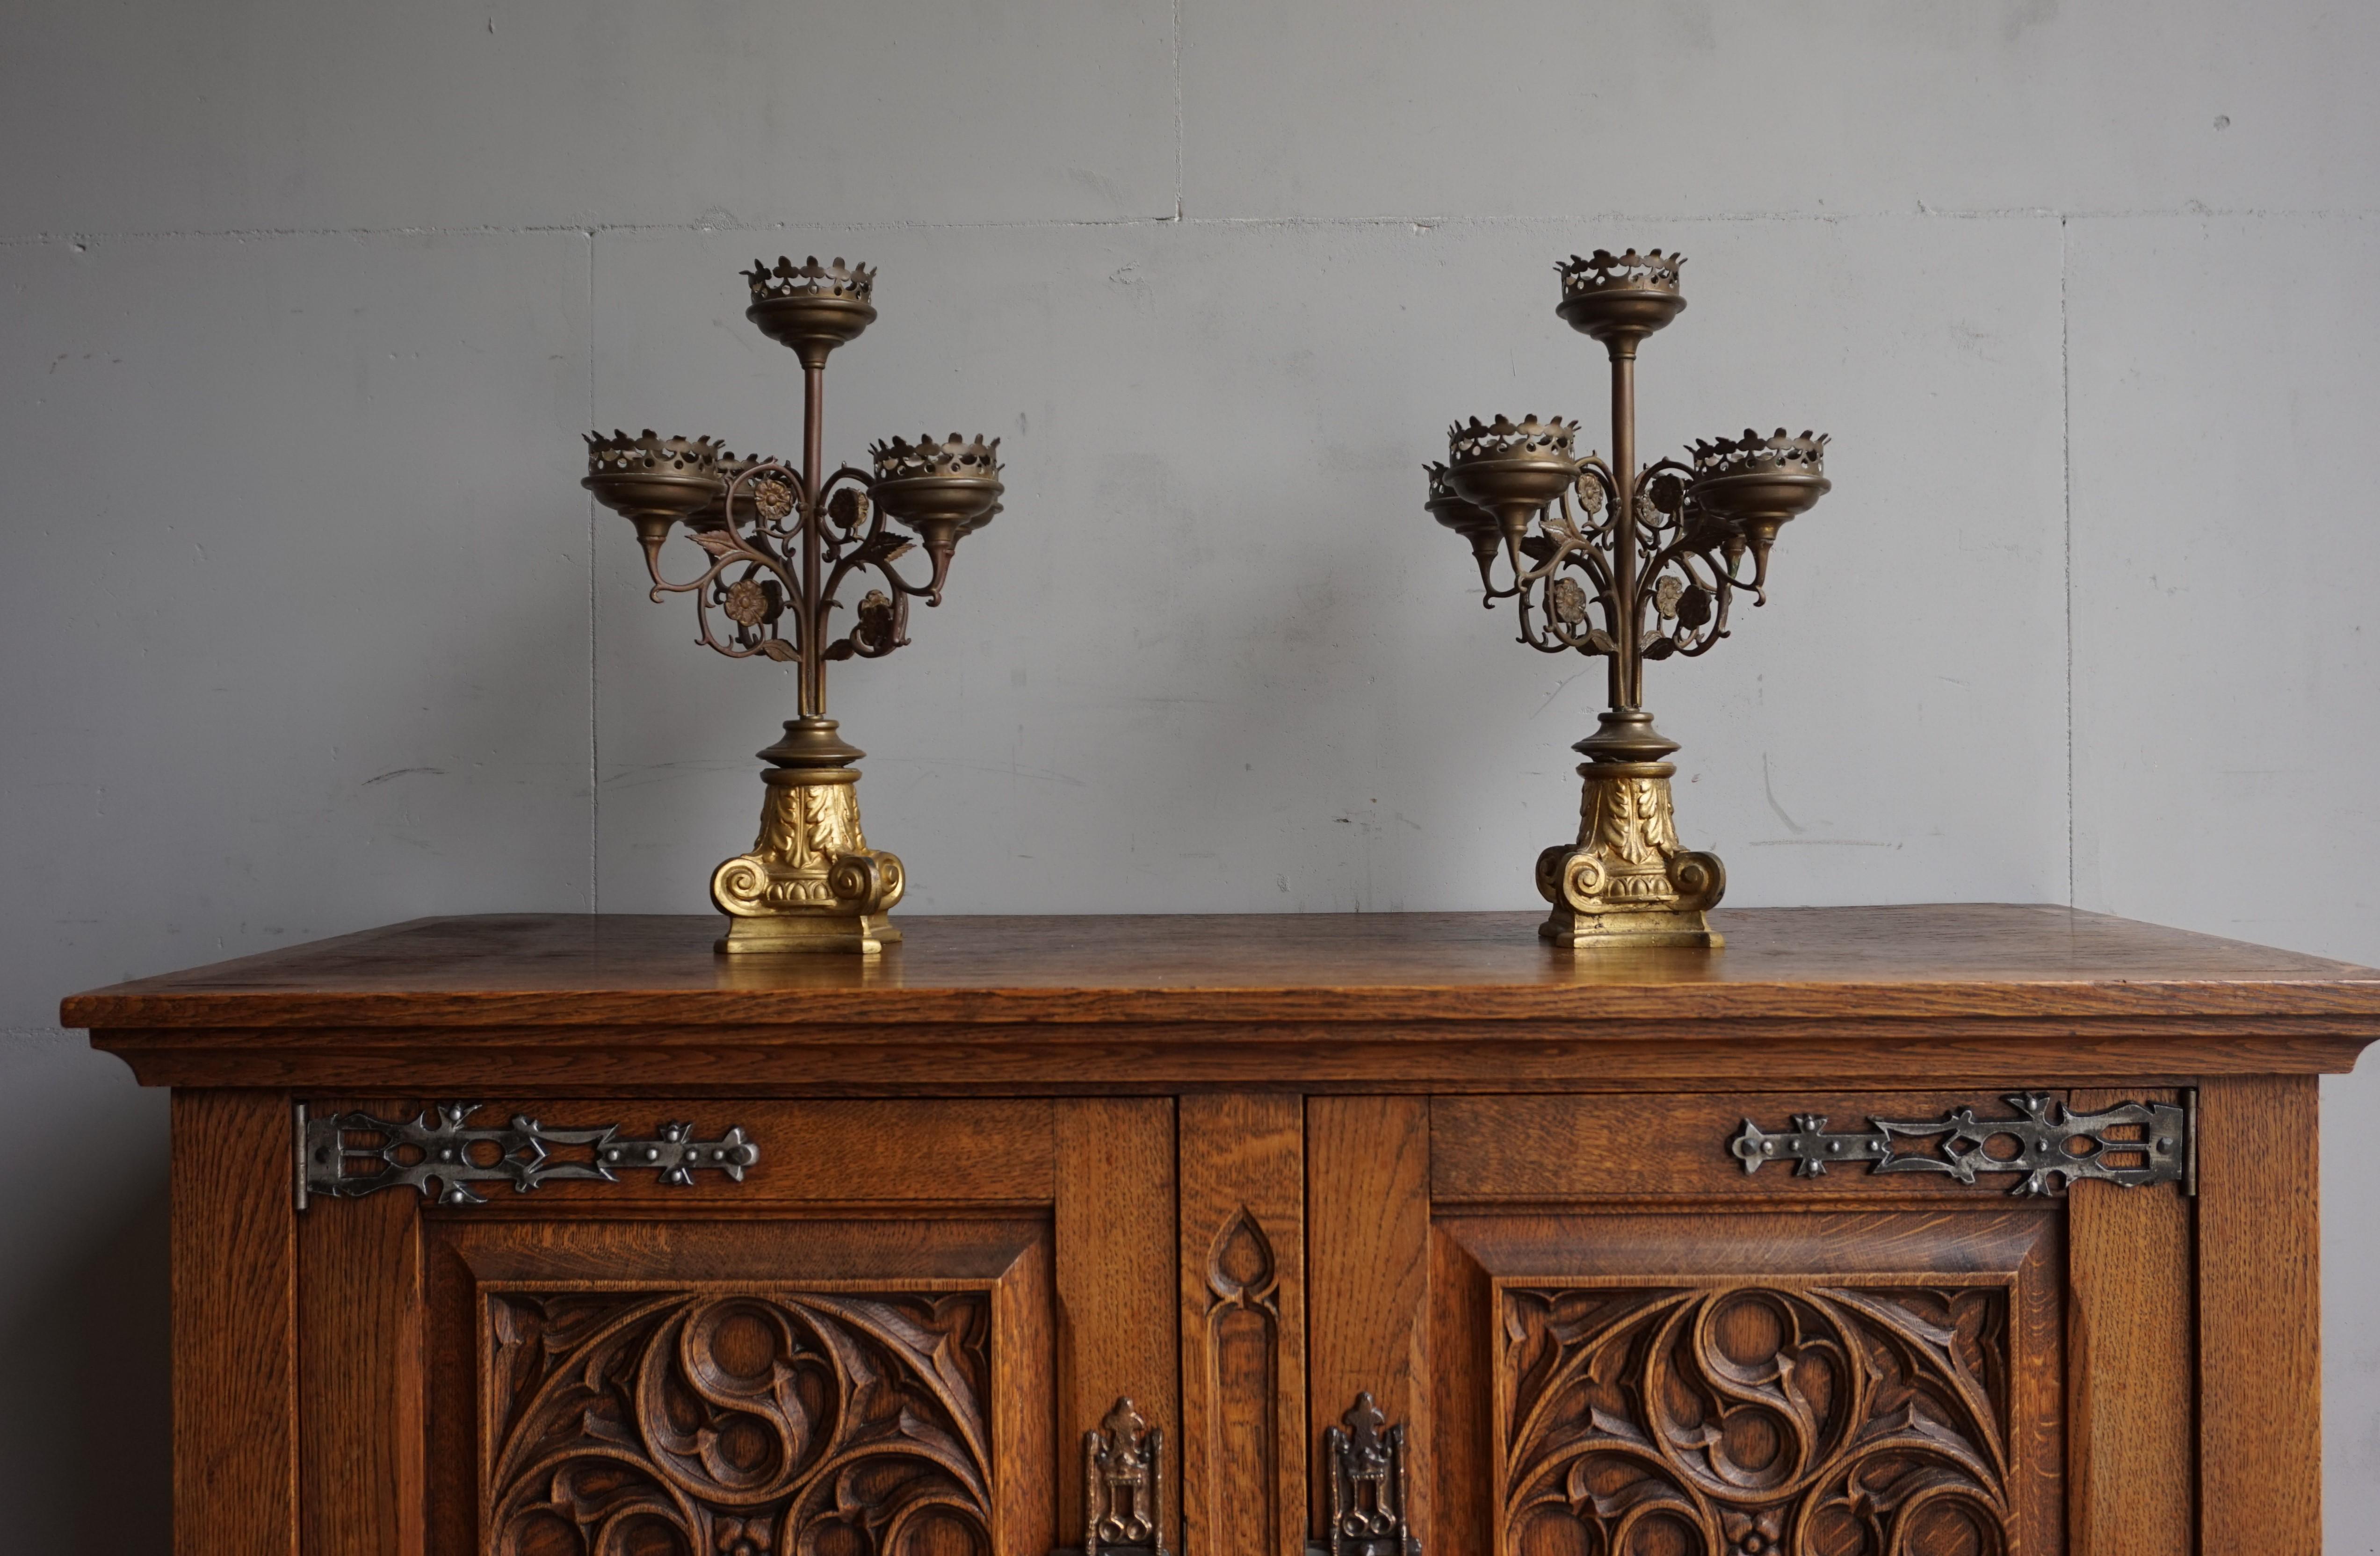 Pair of Gothic church candlesticks for 5 candles each.

For the collectors and enthousiasts of the Gothic Style we also have this rare pair of Gothic church table candelabras. These fine specimen are made around 1890-1910. They are all